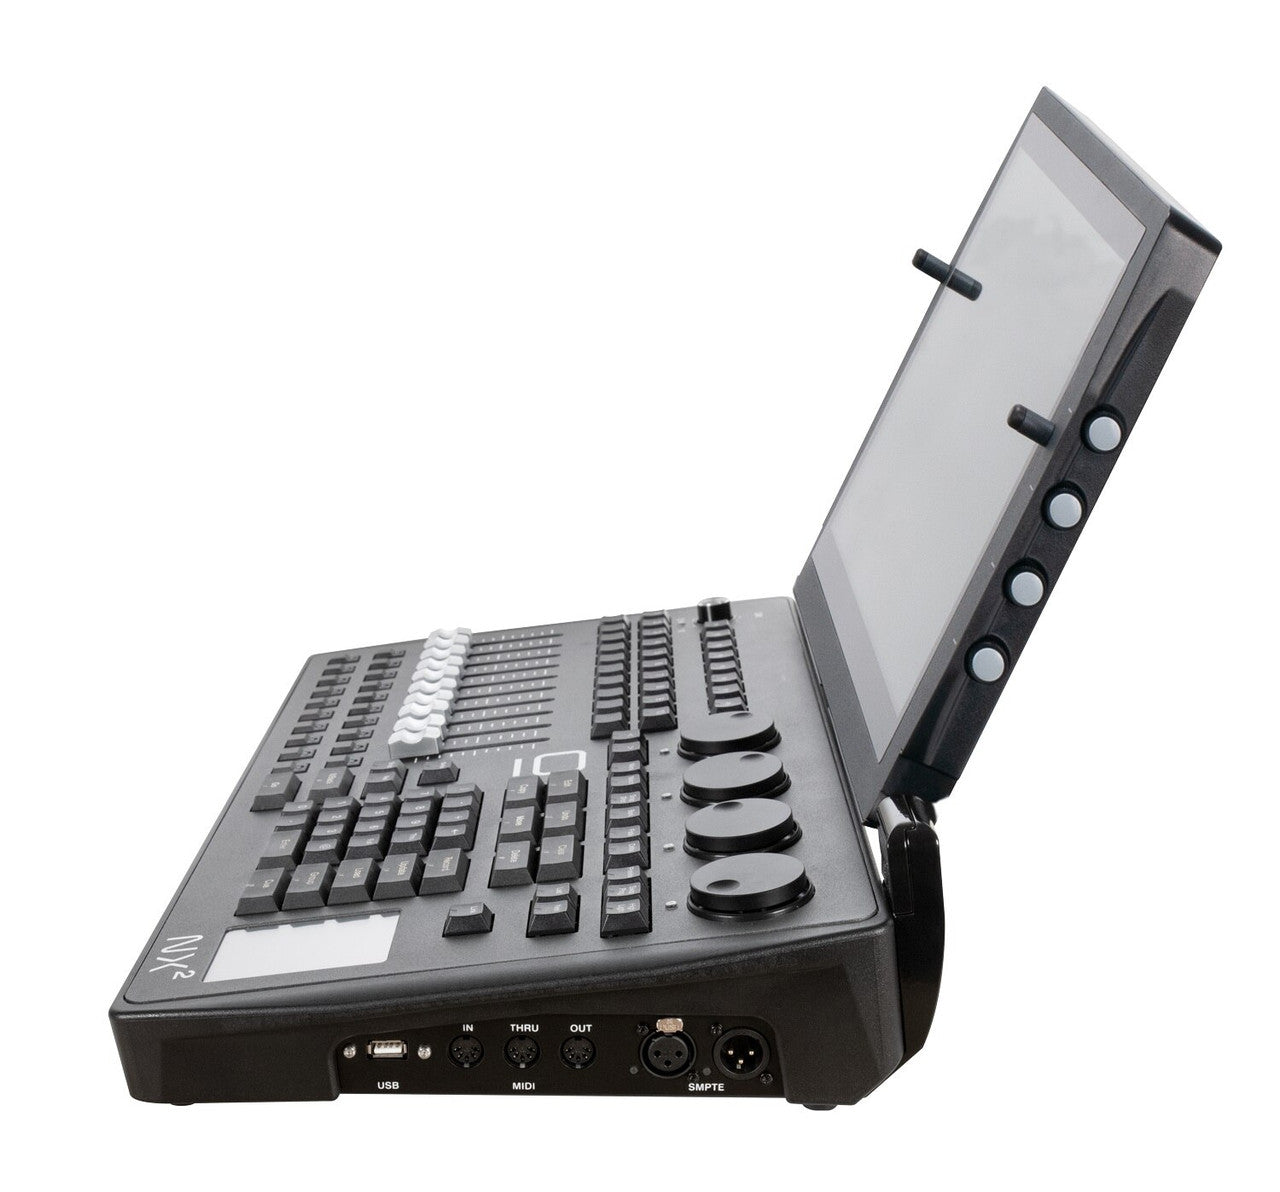 Obsidian Control Systems NX2 Compact Lighting Console with HD Touchscreen and 64 Universes of Output